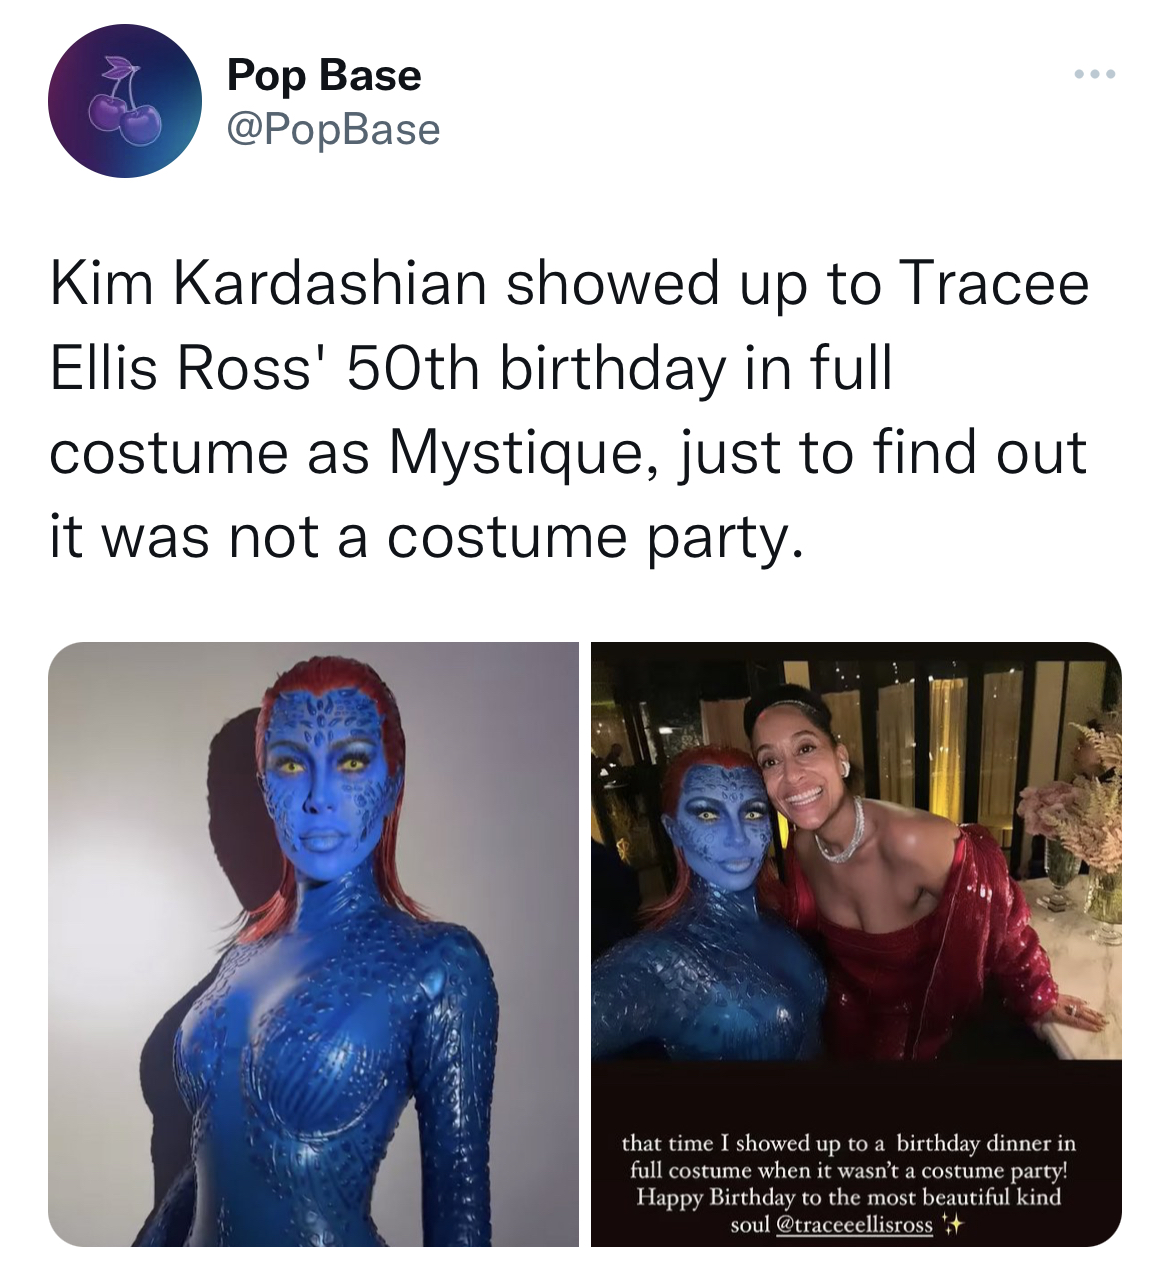 Tweets roasting celebs - human - Pop Base Kim Kardashian showed up to Tracee Ellis Ross' 50th birthday in full costume as Mystique, just to find out it was not a costume party. that time I showed up to a birthday dinner in full costume when it wasn't a co